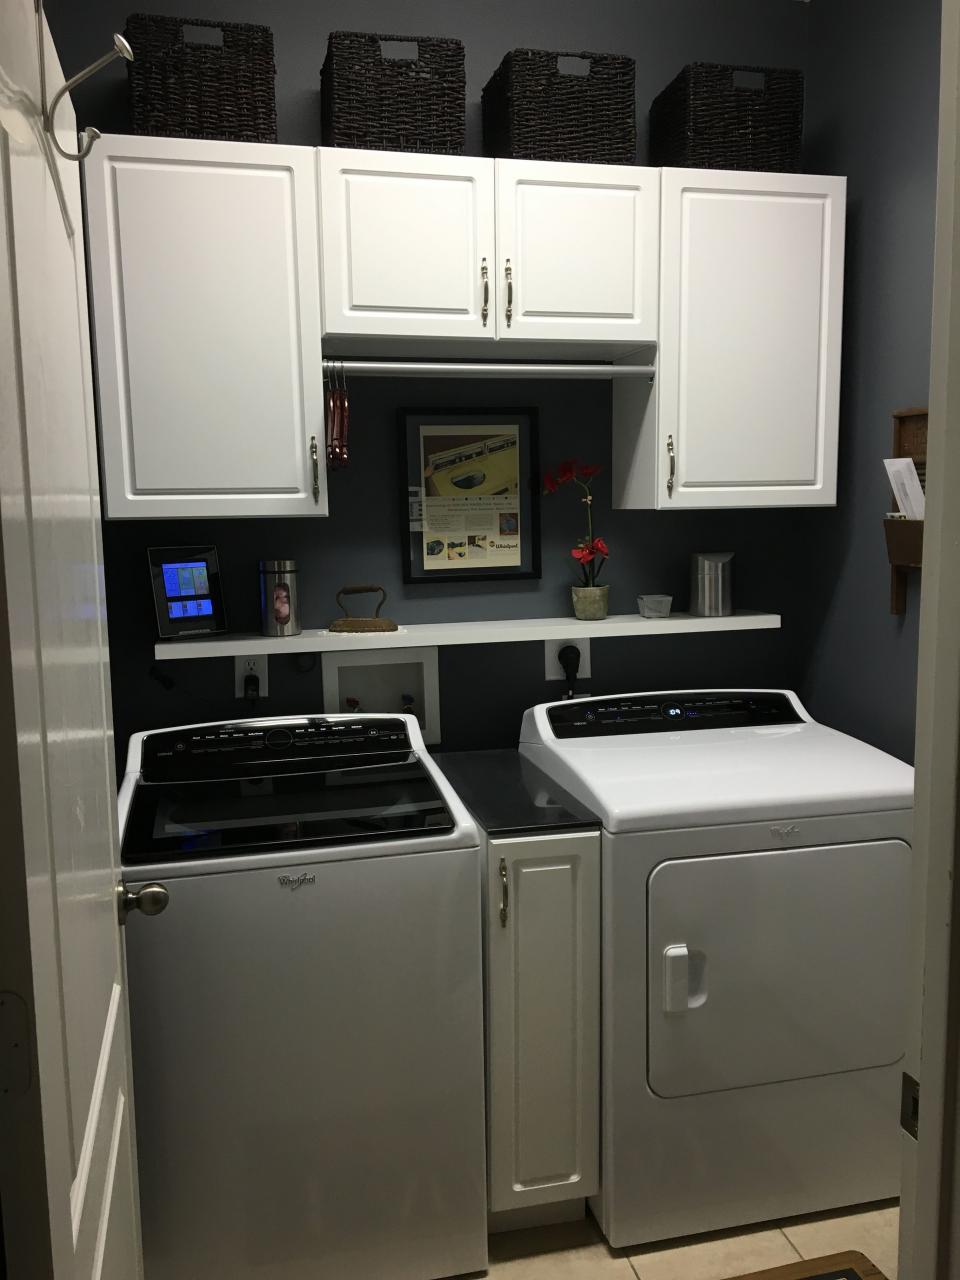 Laundry room remodel using from Home Depot and shelf from